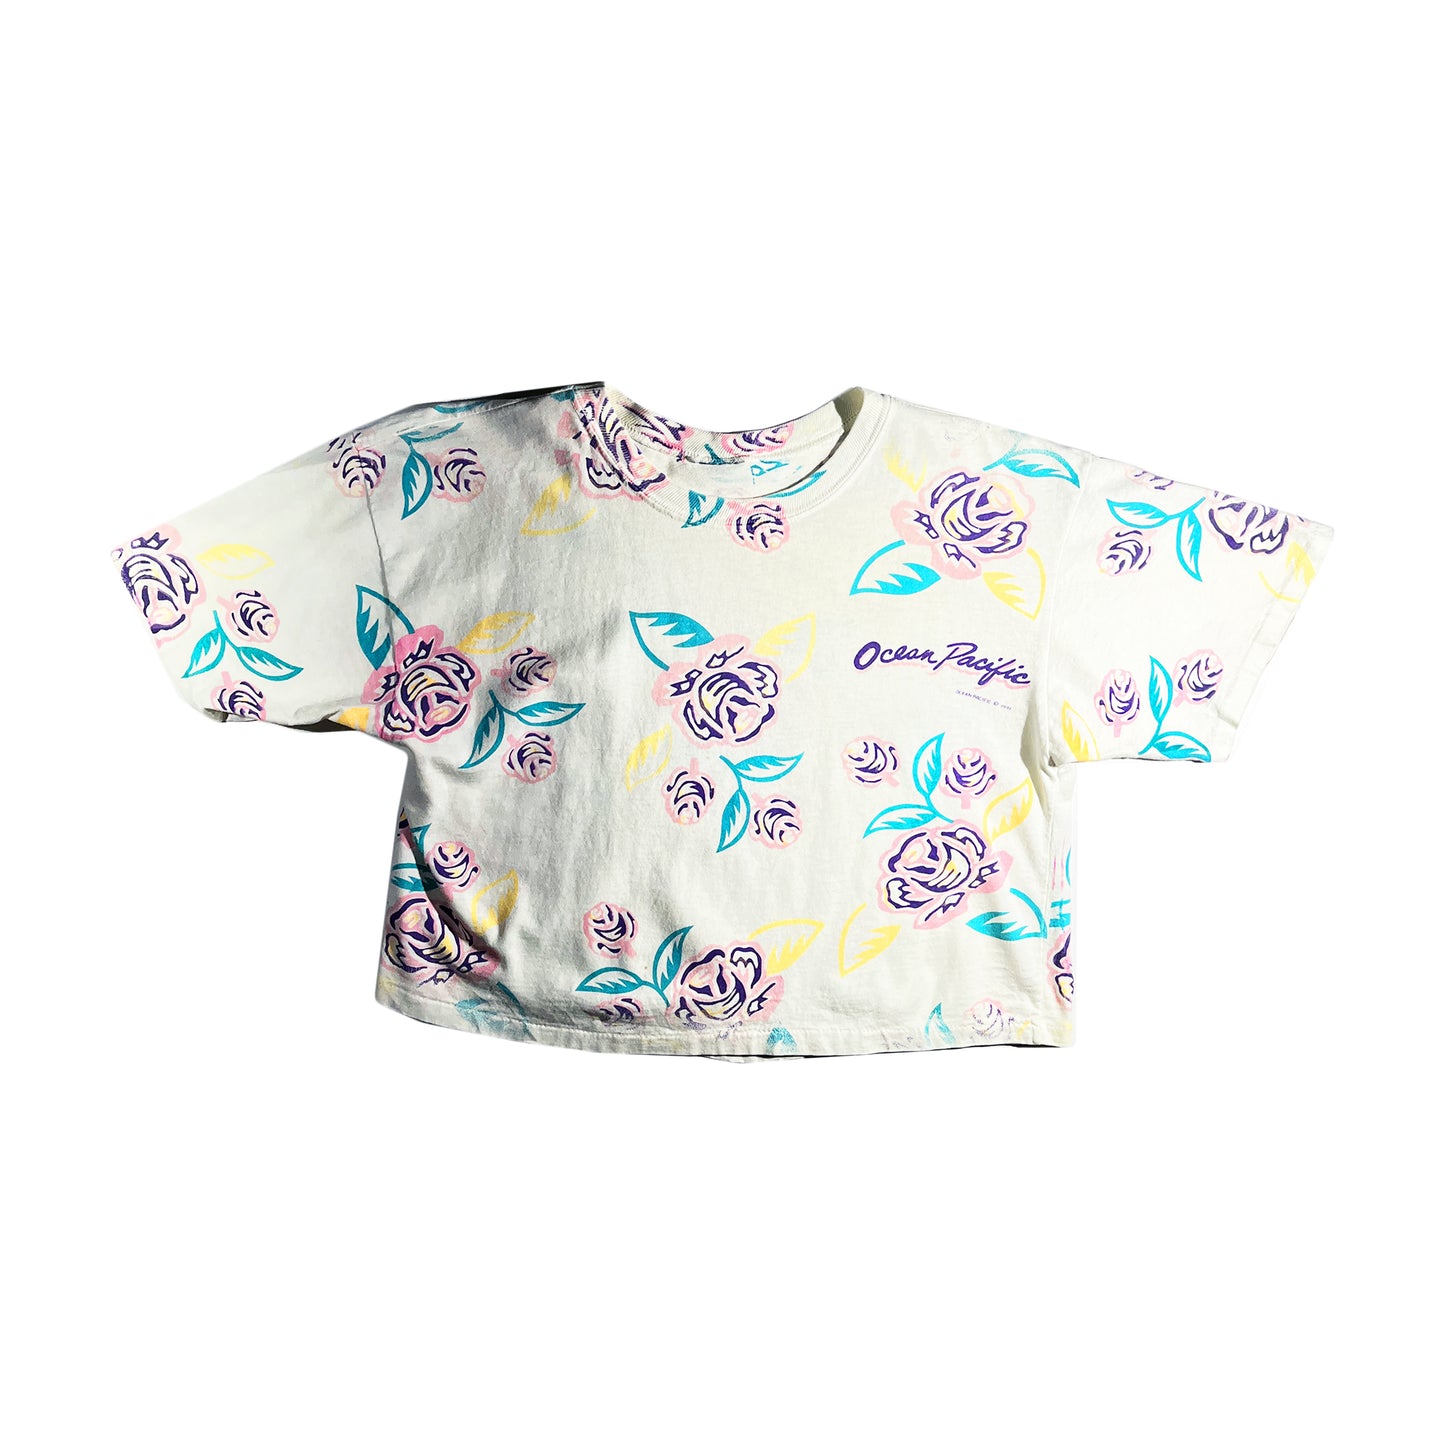 Vintage Ocean Pacific T-Shirt Cropped AND Boxy Fit 90's Floral